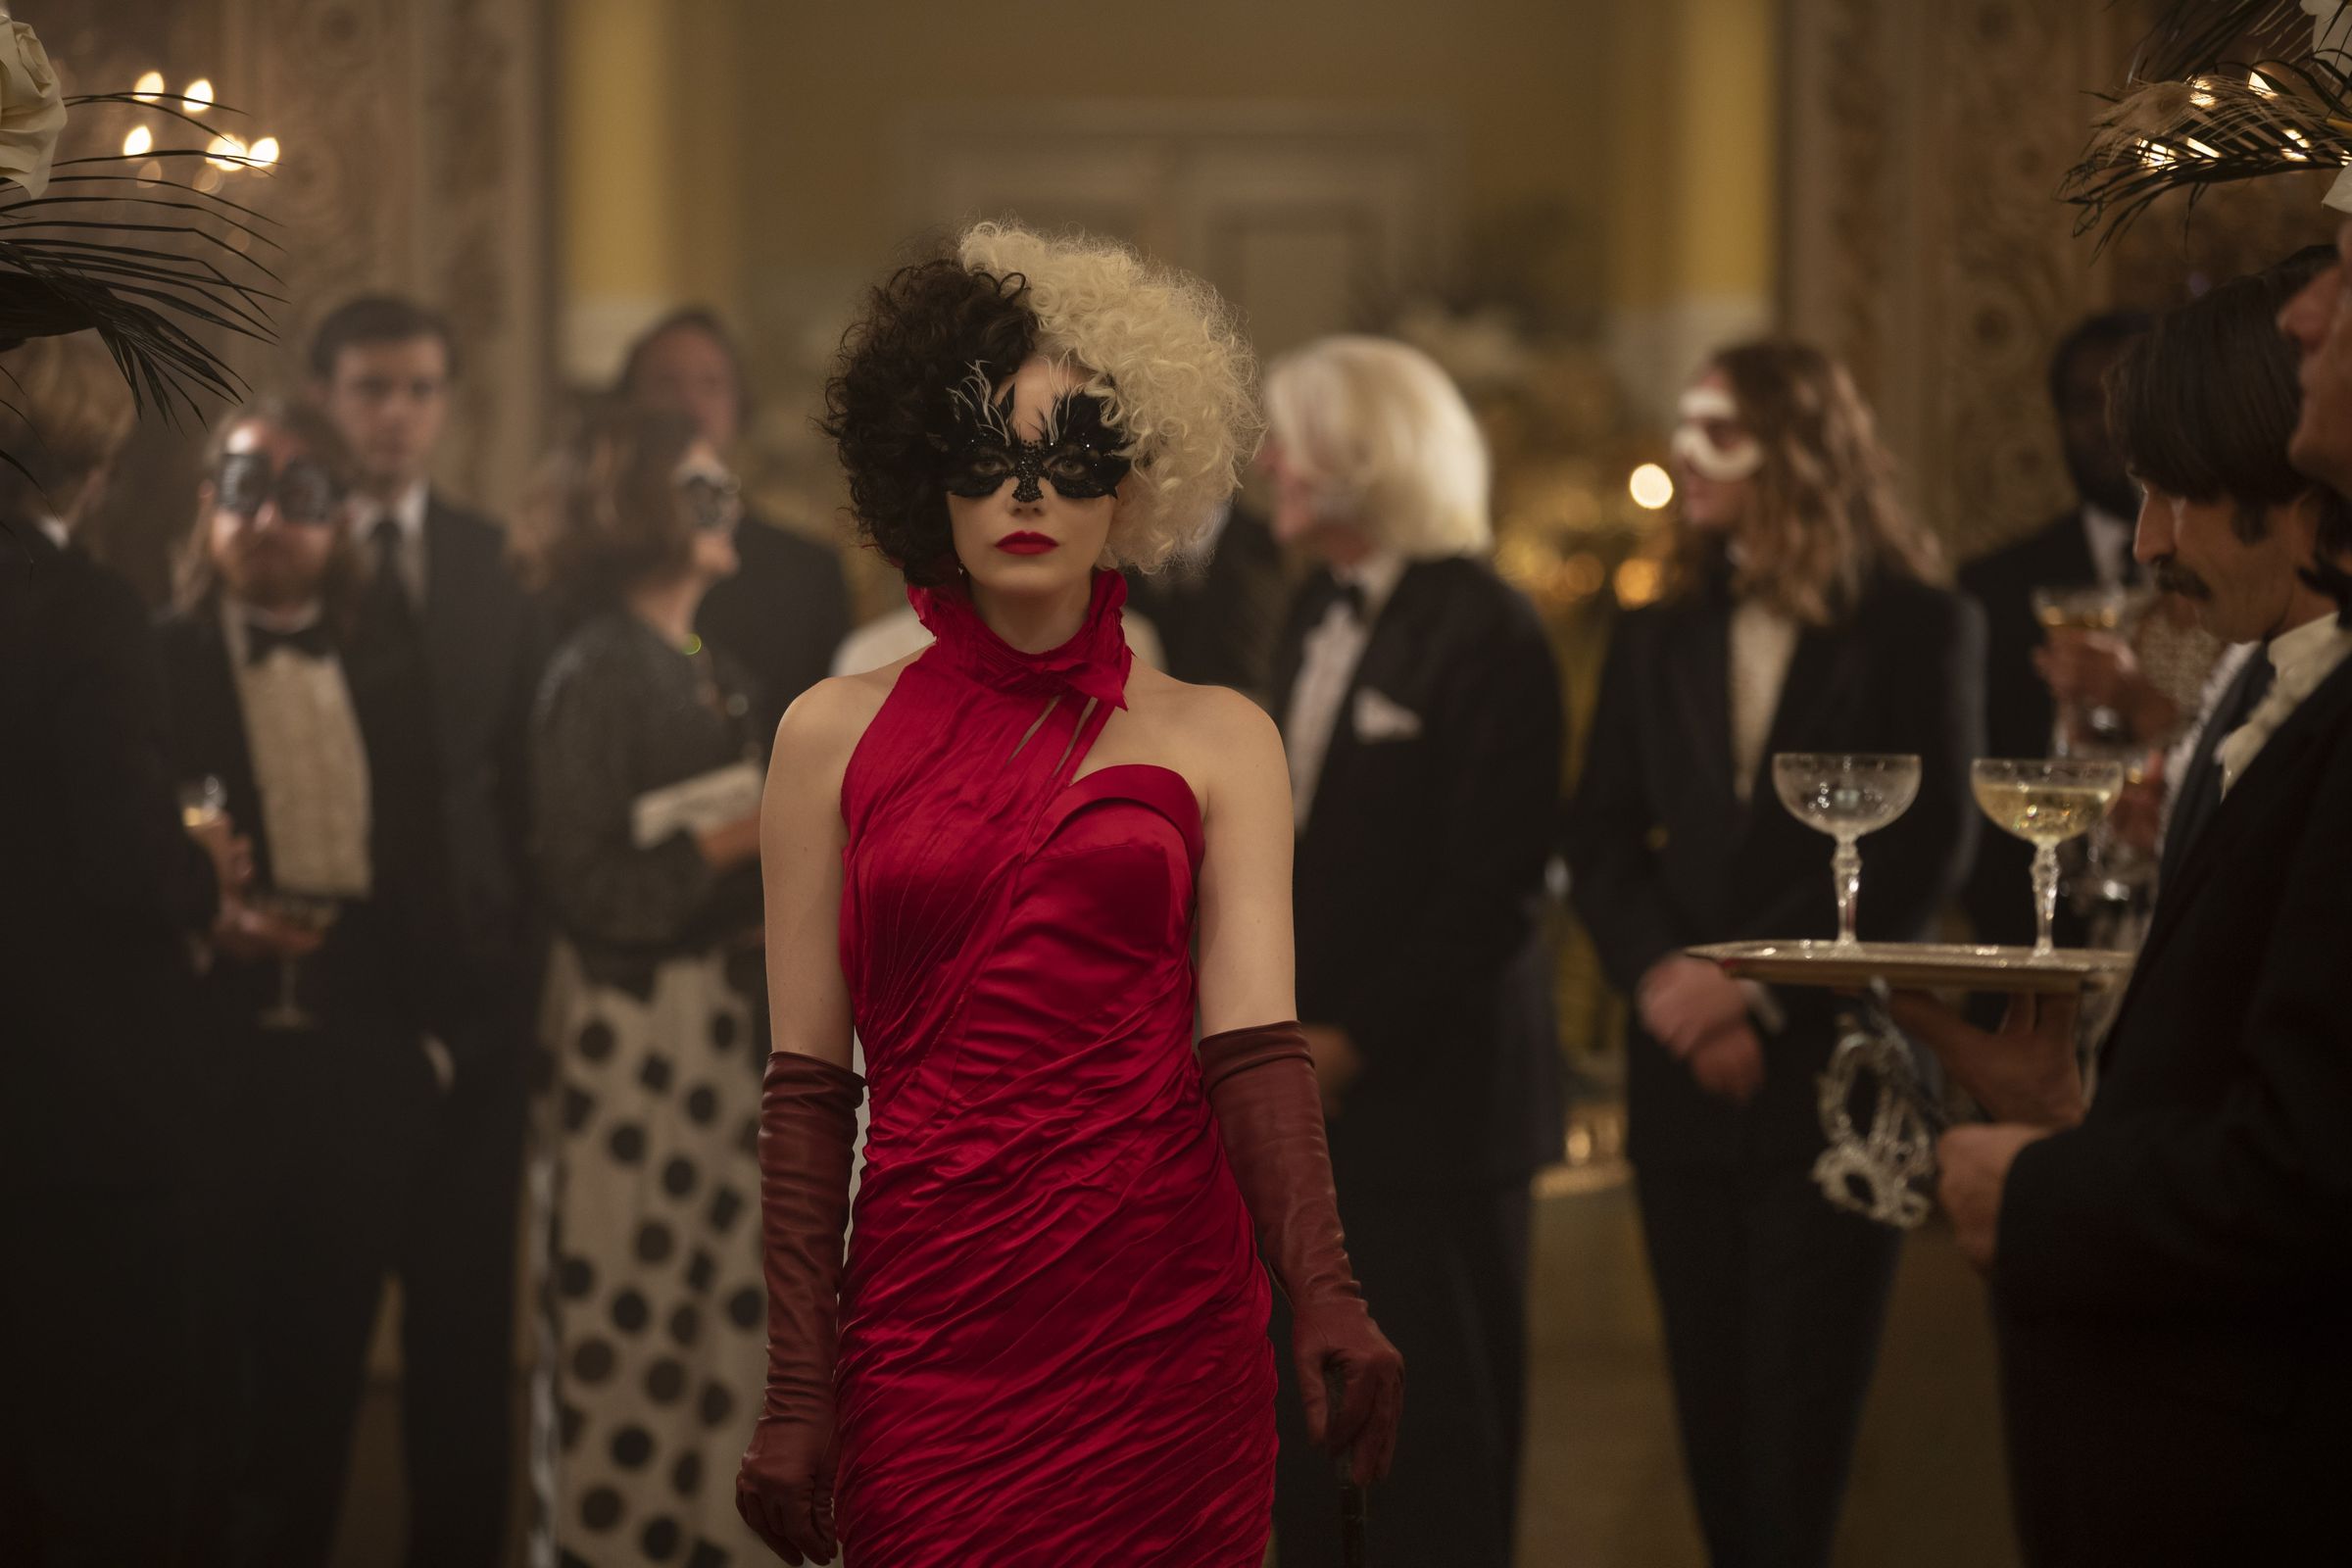 Emma Stone as Cruella de Vil in a red gown surrounded by party goers dressed entirely in black and white.